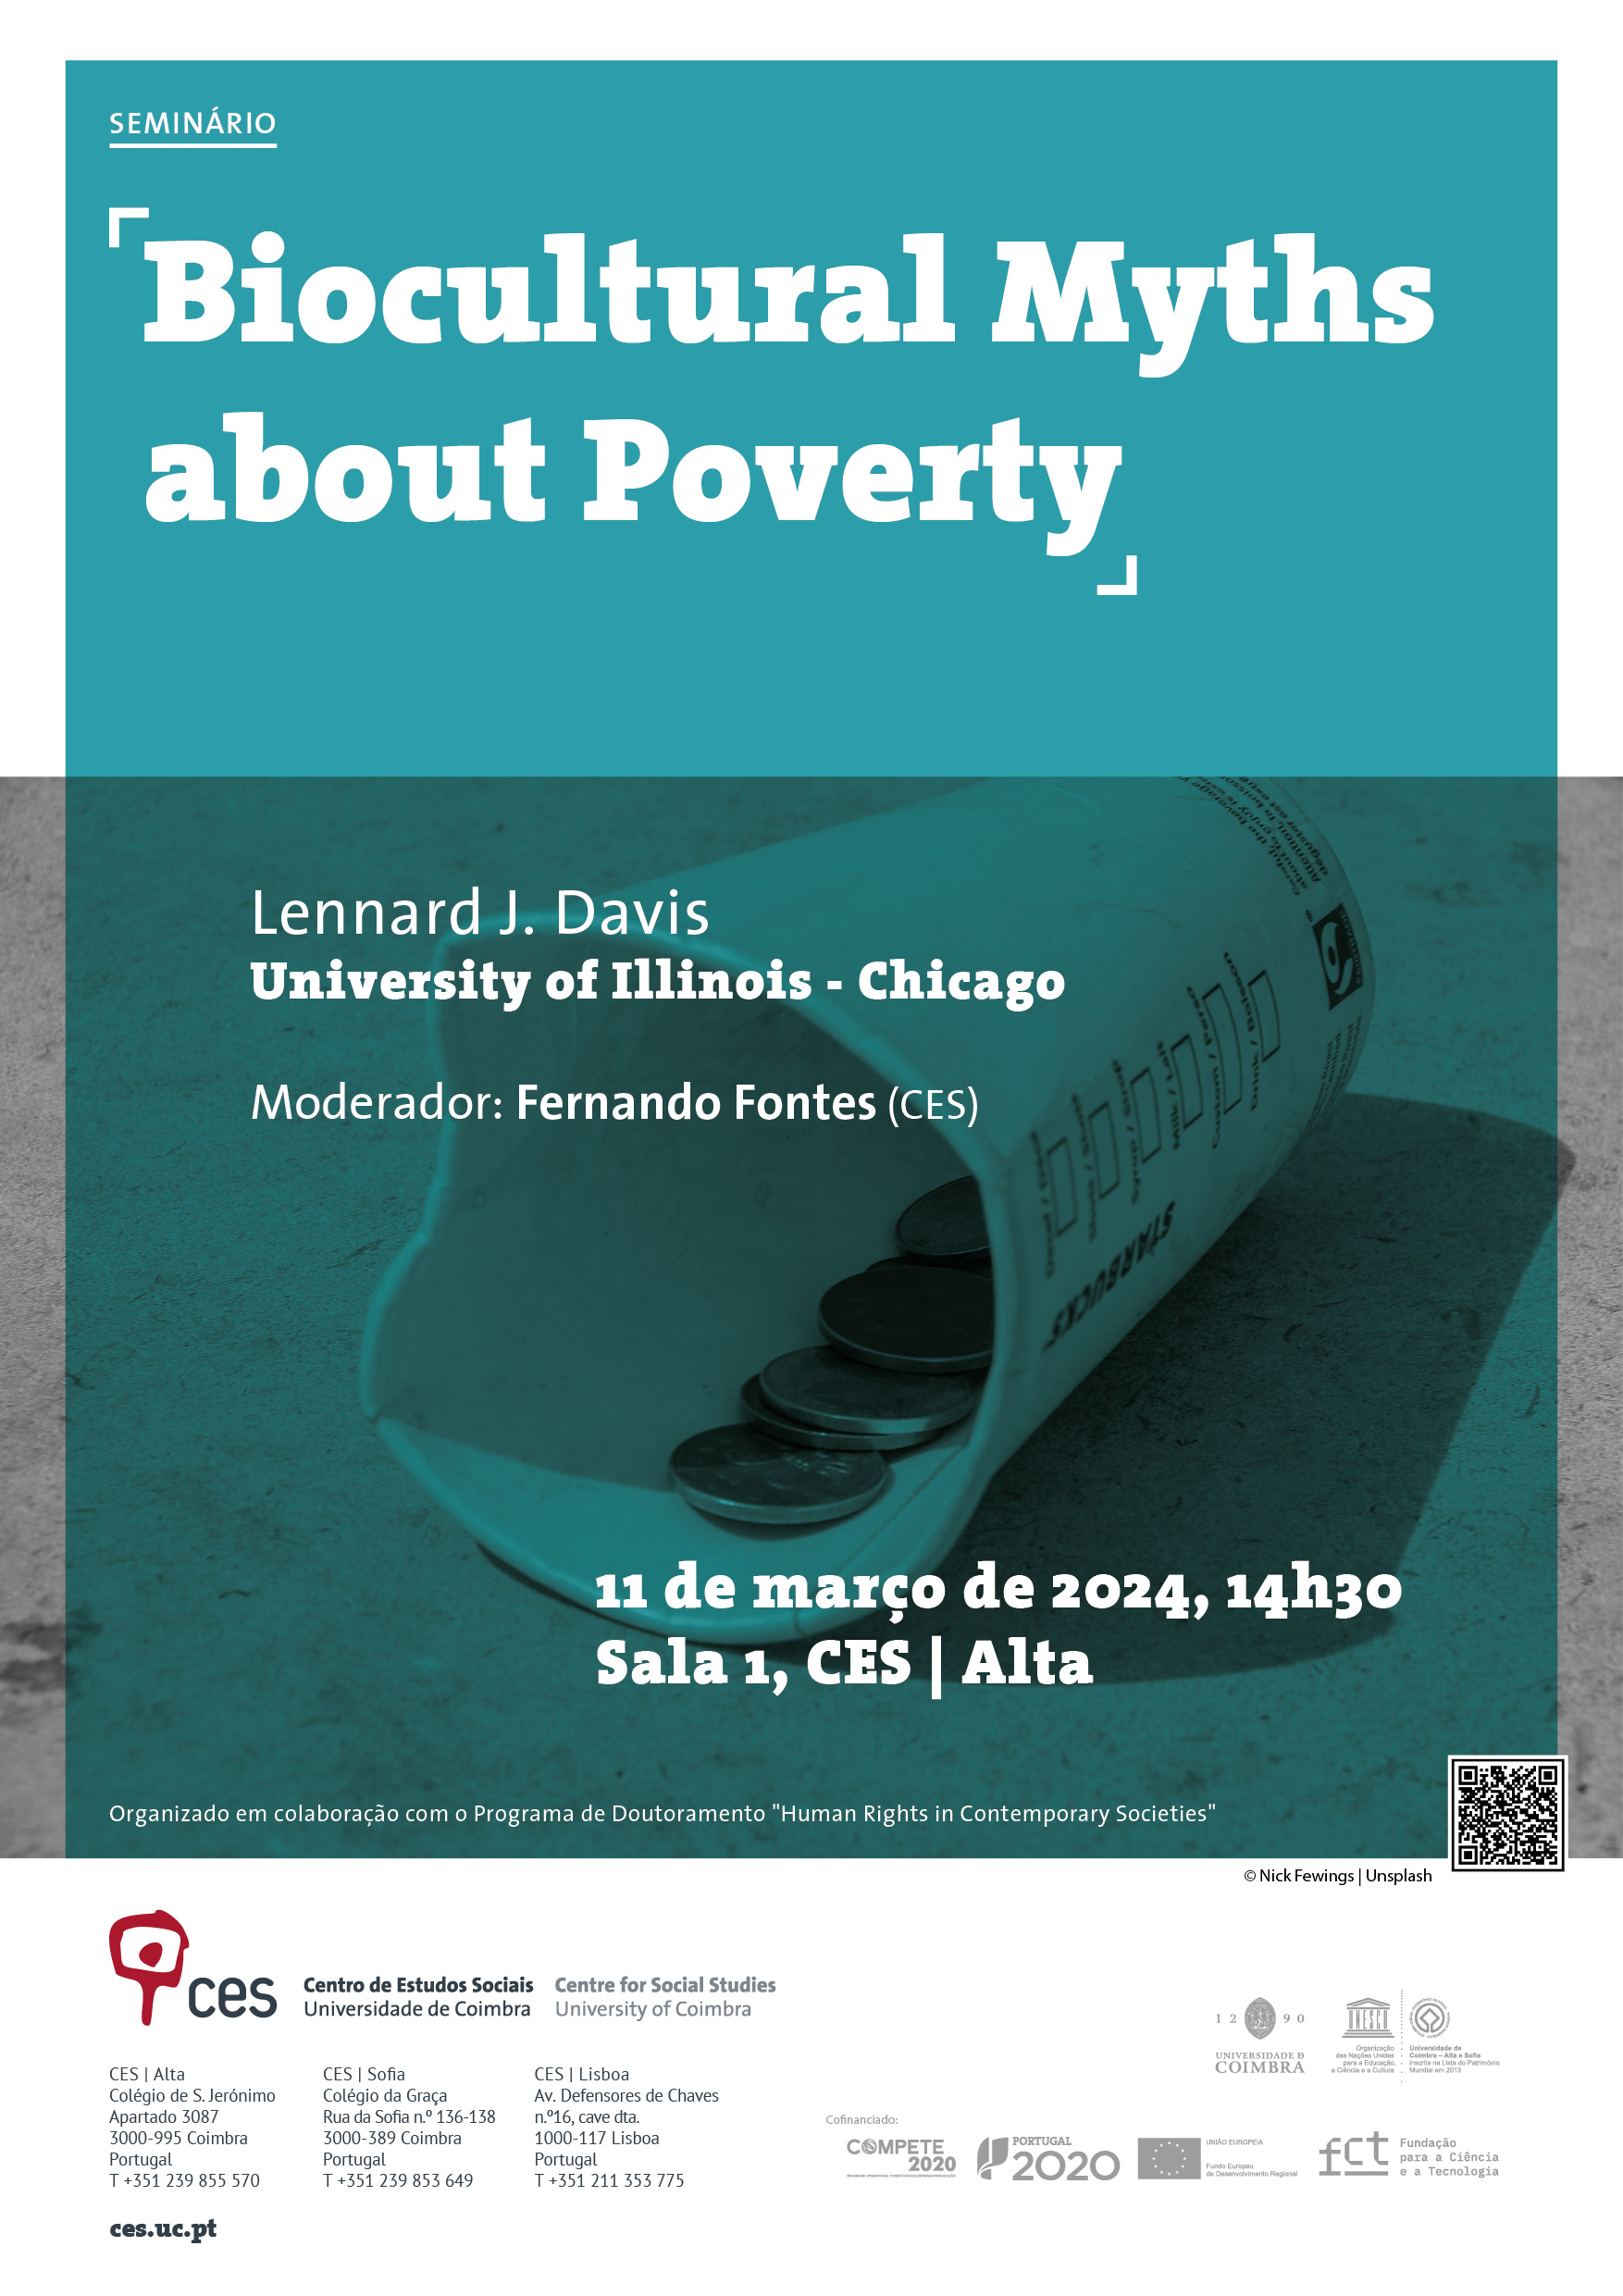 Biocultural Myths about Poverty<span id="edit_45034"><script>$(function() { $('#edit_45034').load( "/myces/user/editobj.php?tipo=evento&id=45034" ); });</script></span>